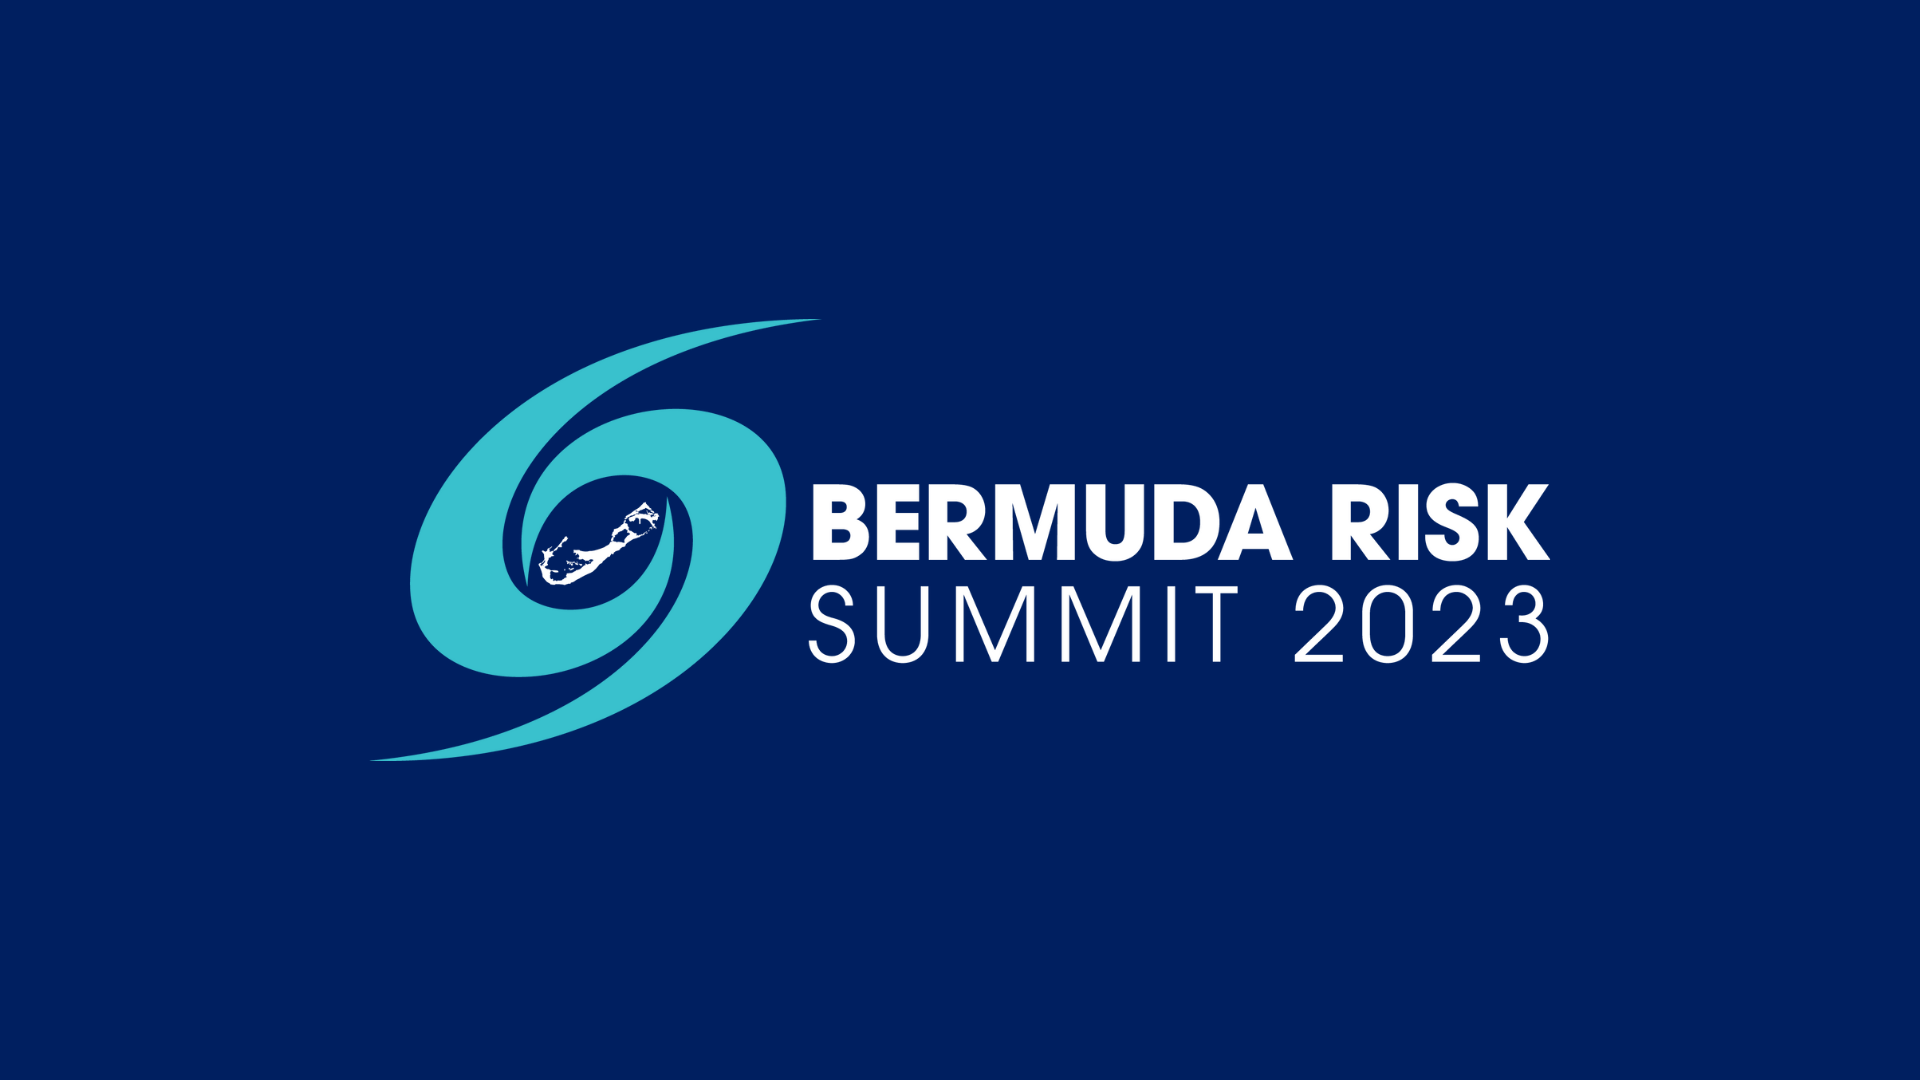 Bermuda Risk Summit 2023 – 27 January Last Chance to Secure Early Bird Rate